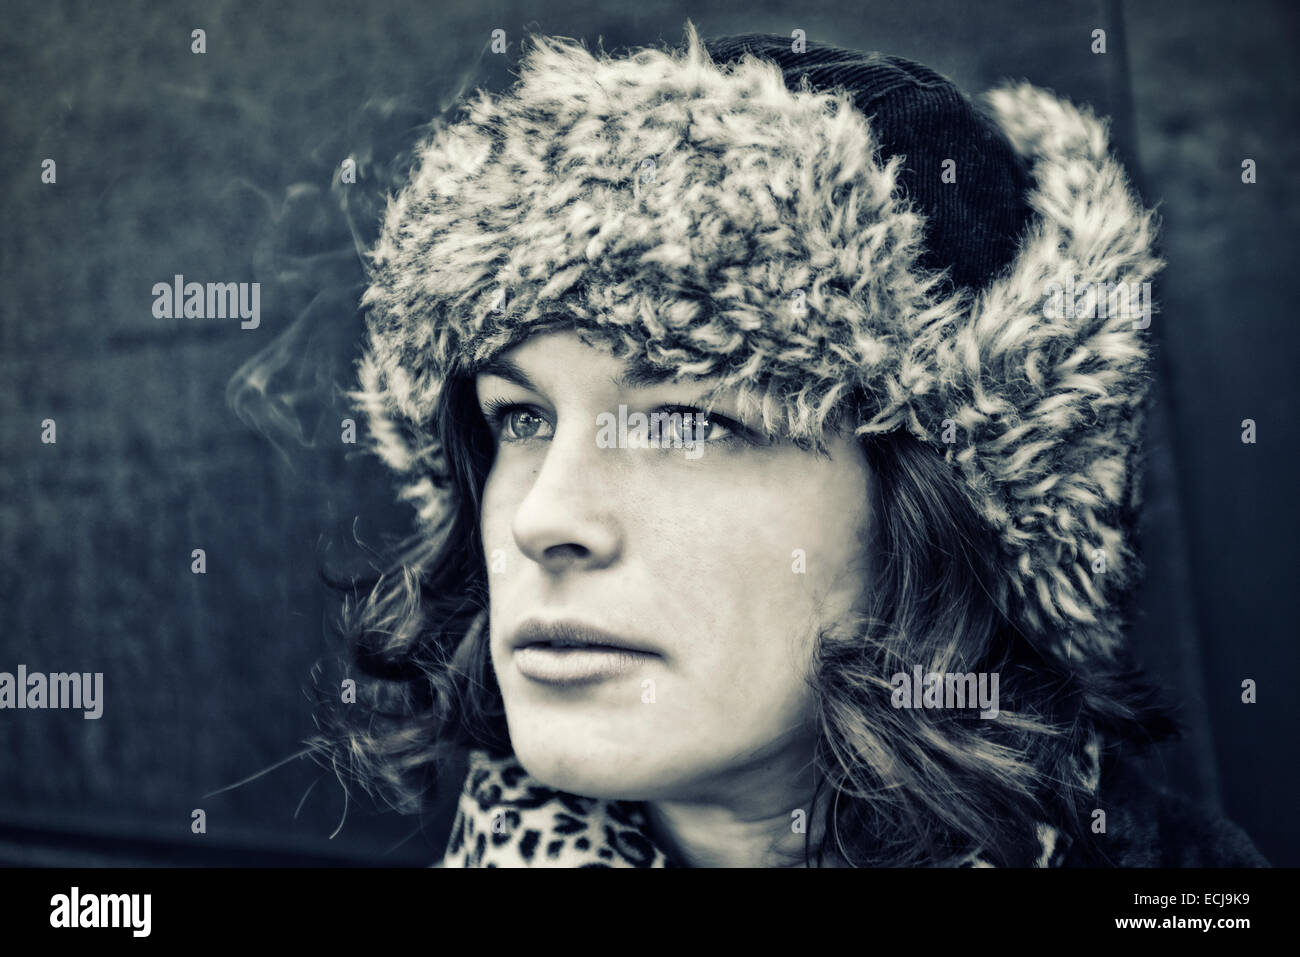 Portrait of a young woman with fur hat Banque D'Images